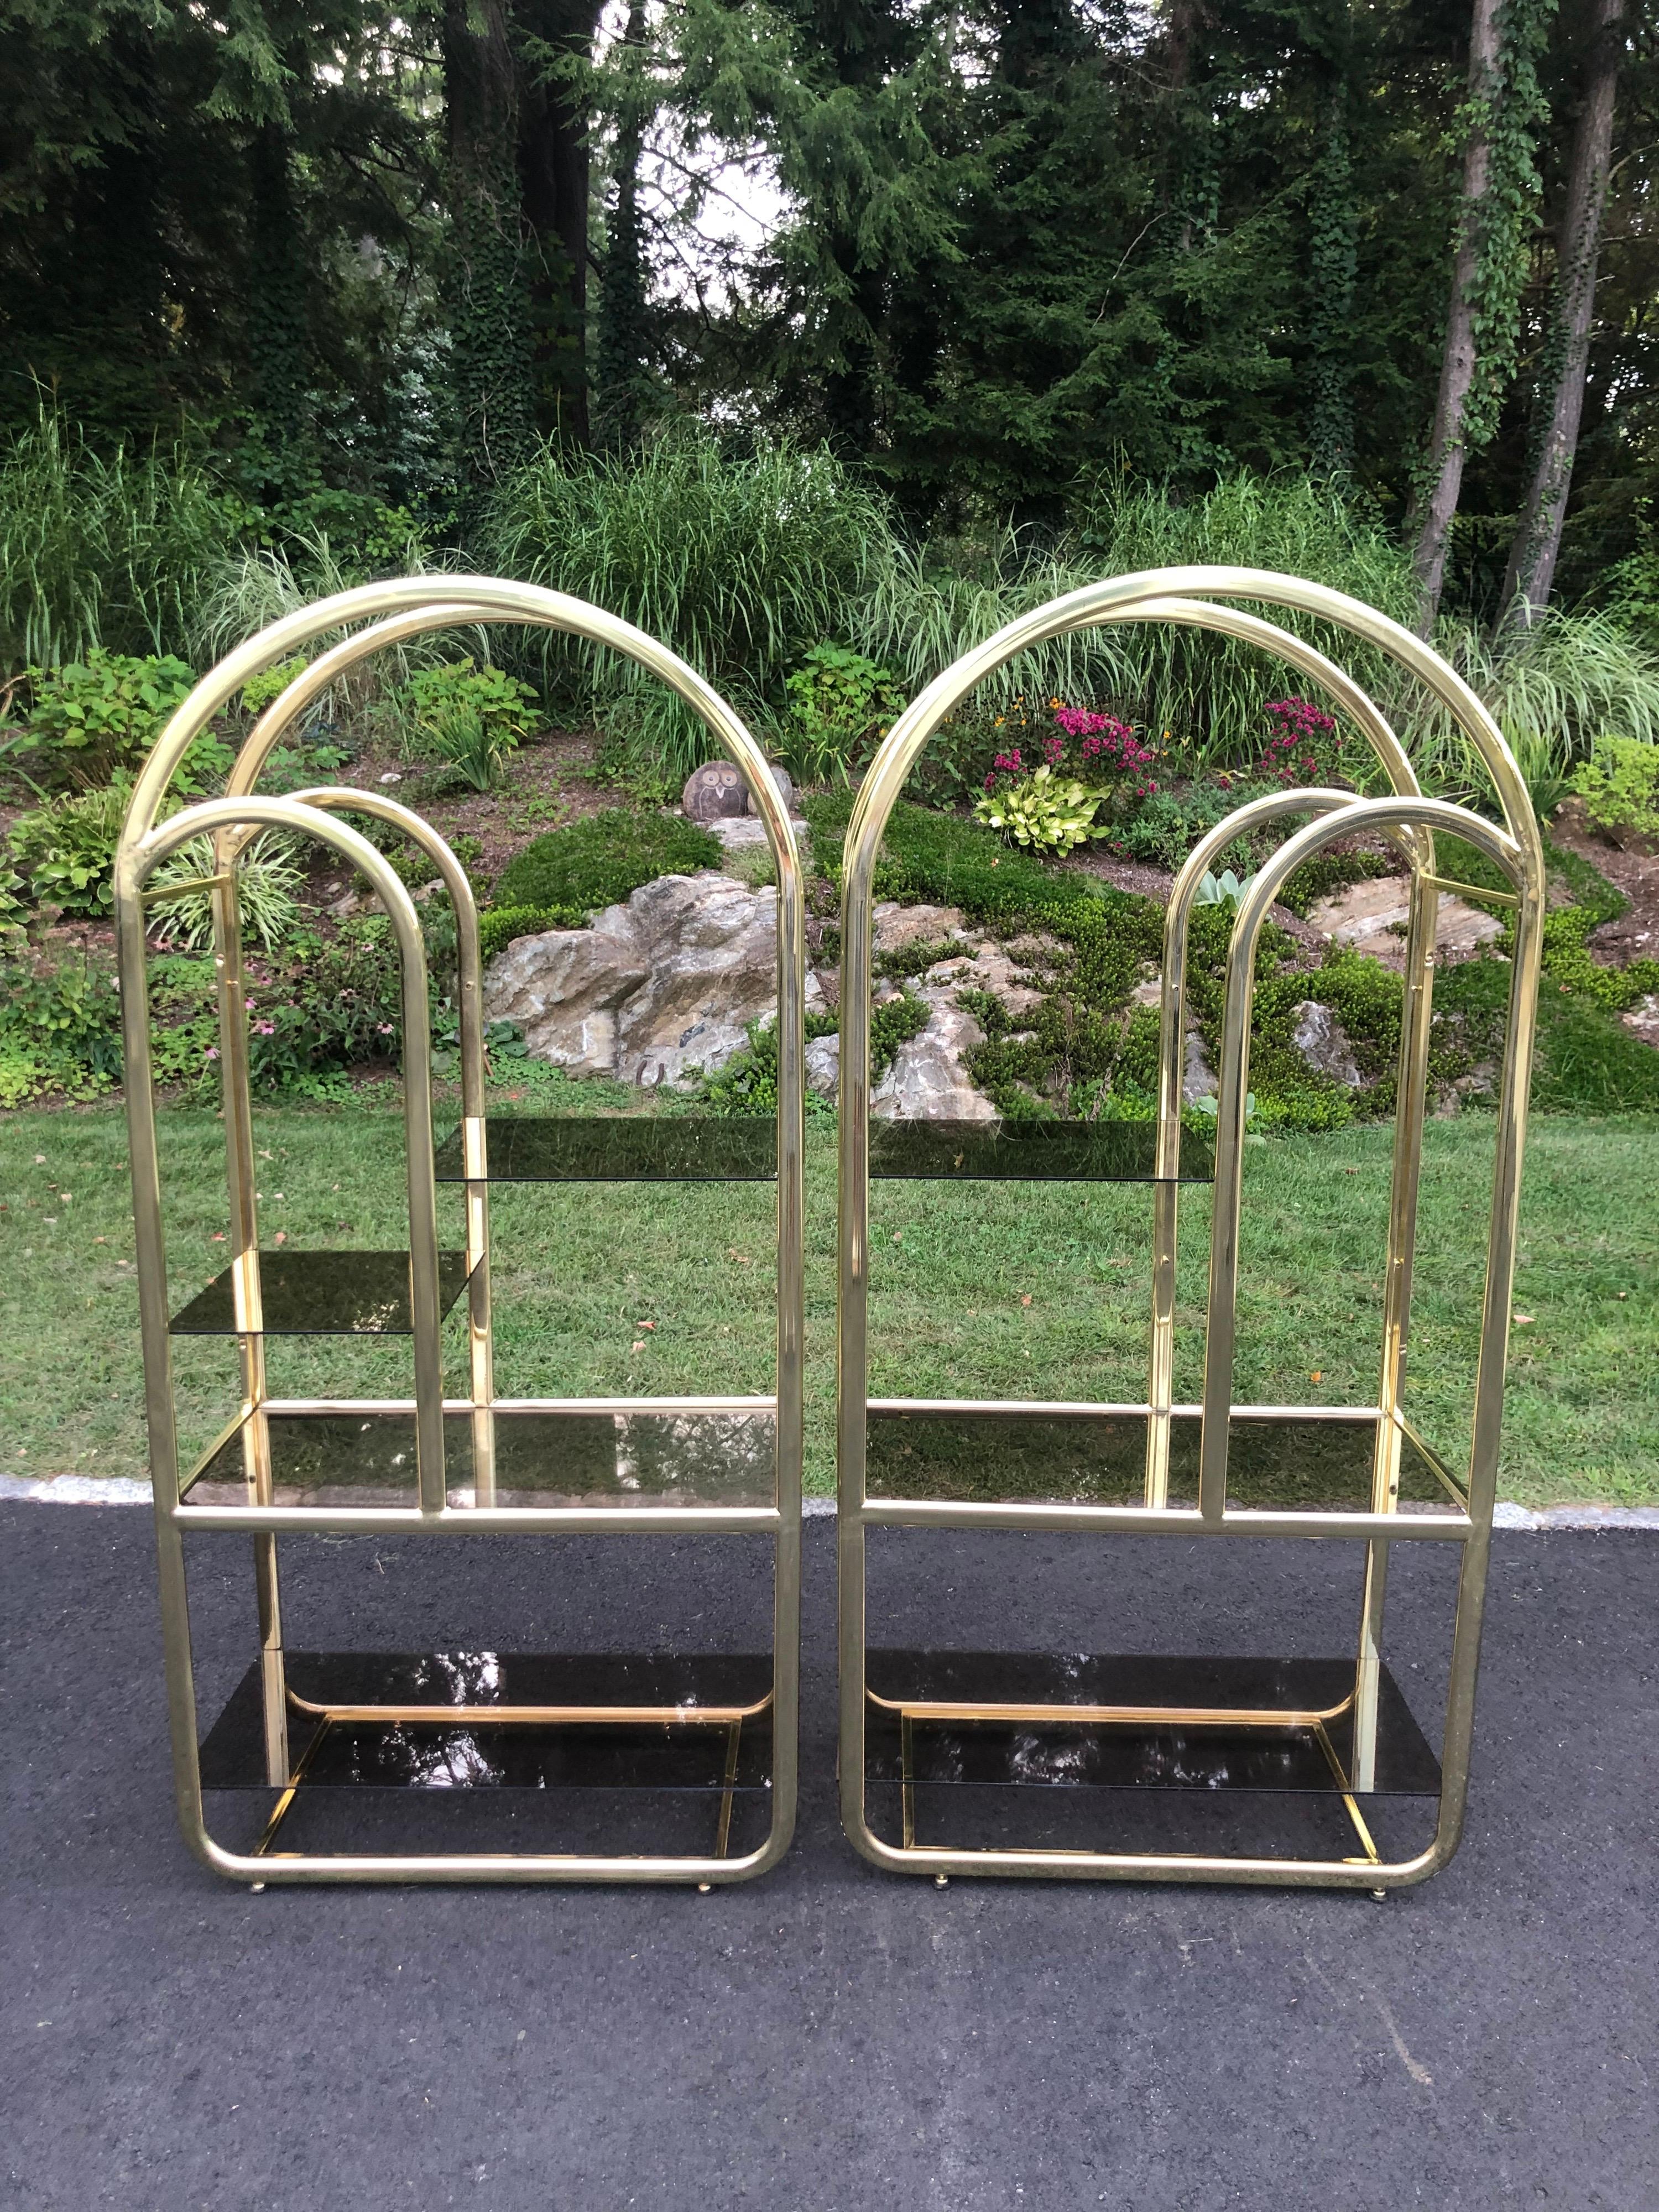 Pair of brass and smoked glass etageres. Post Modern 1980's Hollywood Regency style. Missing one smoked glass shelf in photos that has since been replaced. More photos available. Art deco curved shapes make up this beauty.